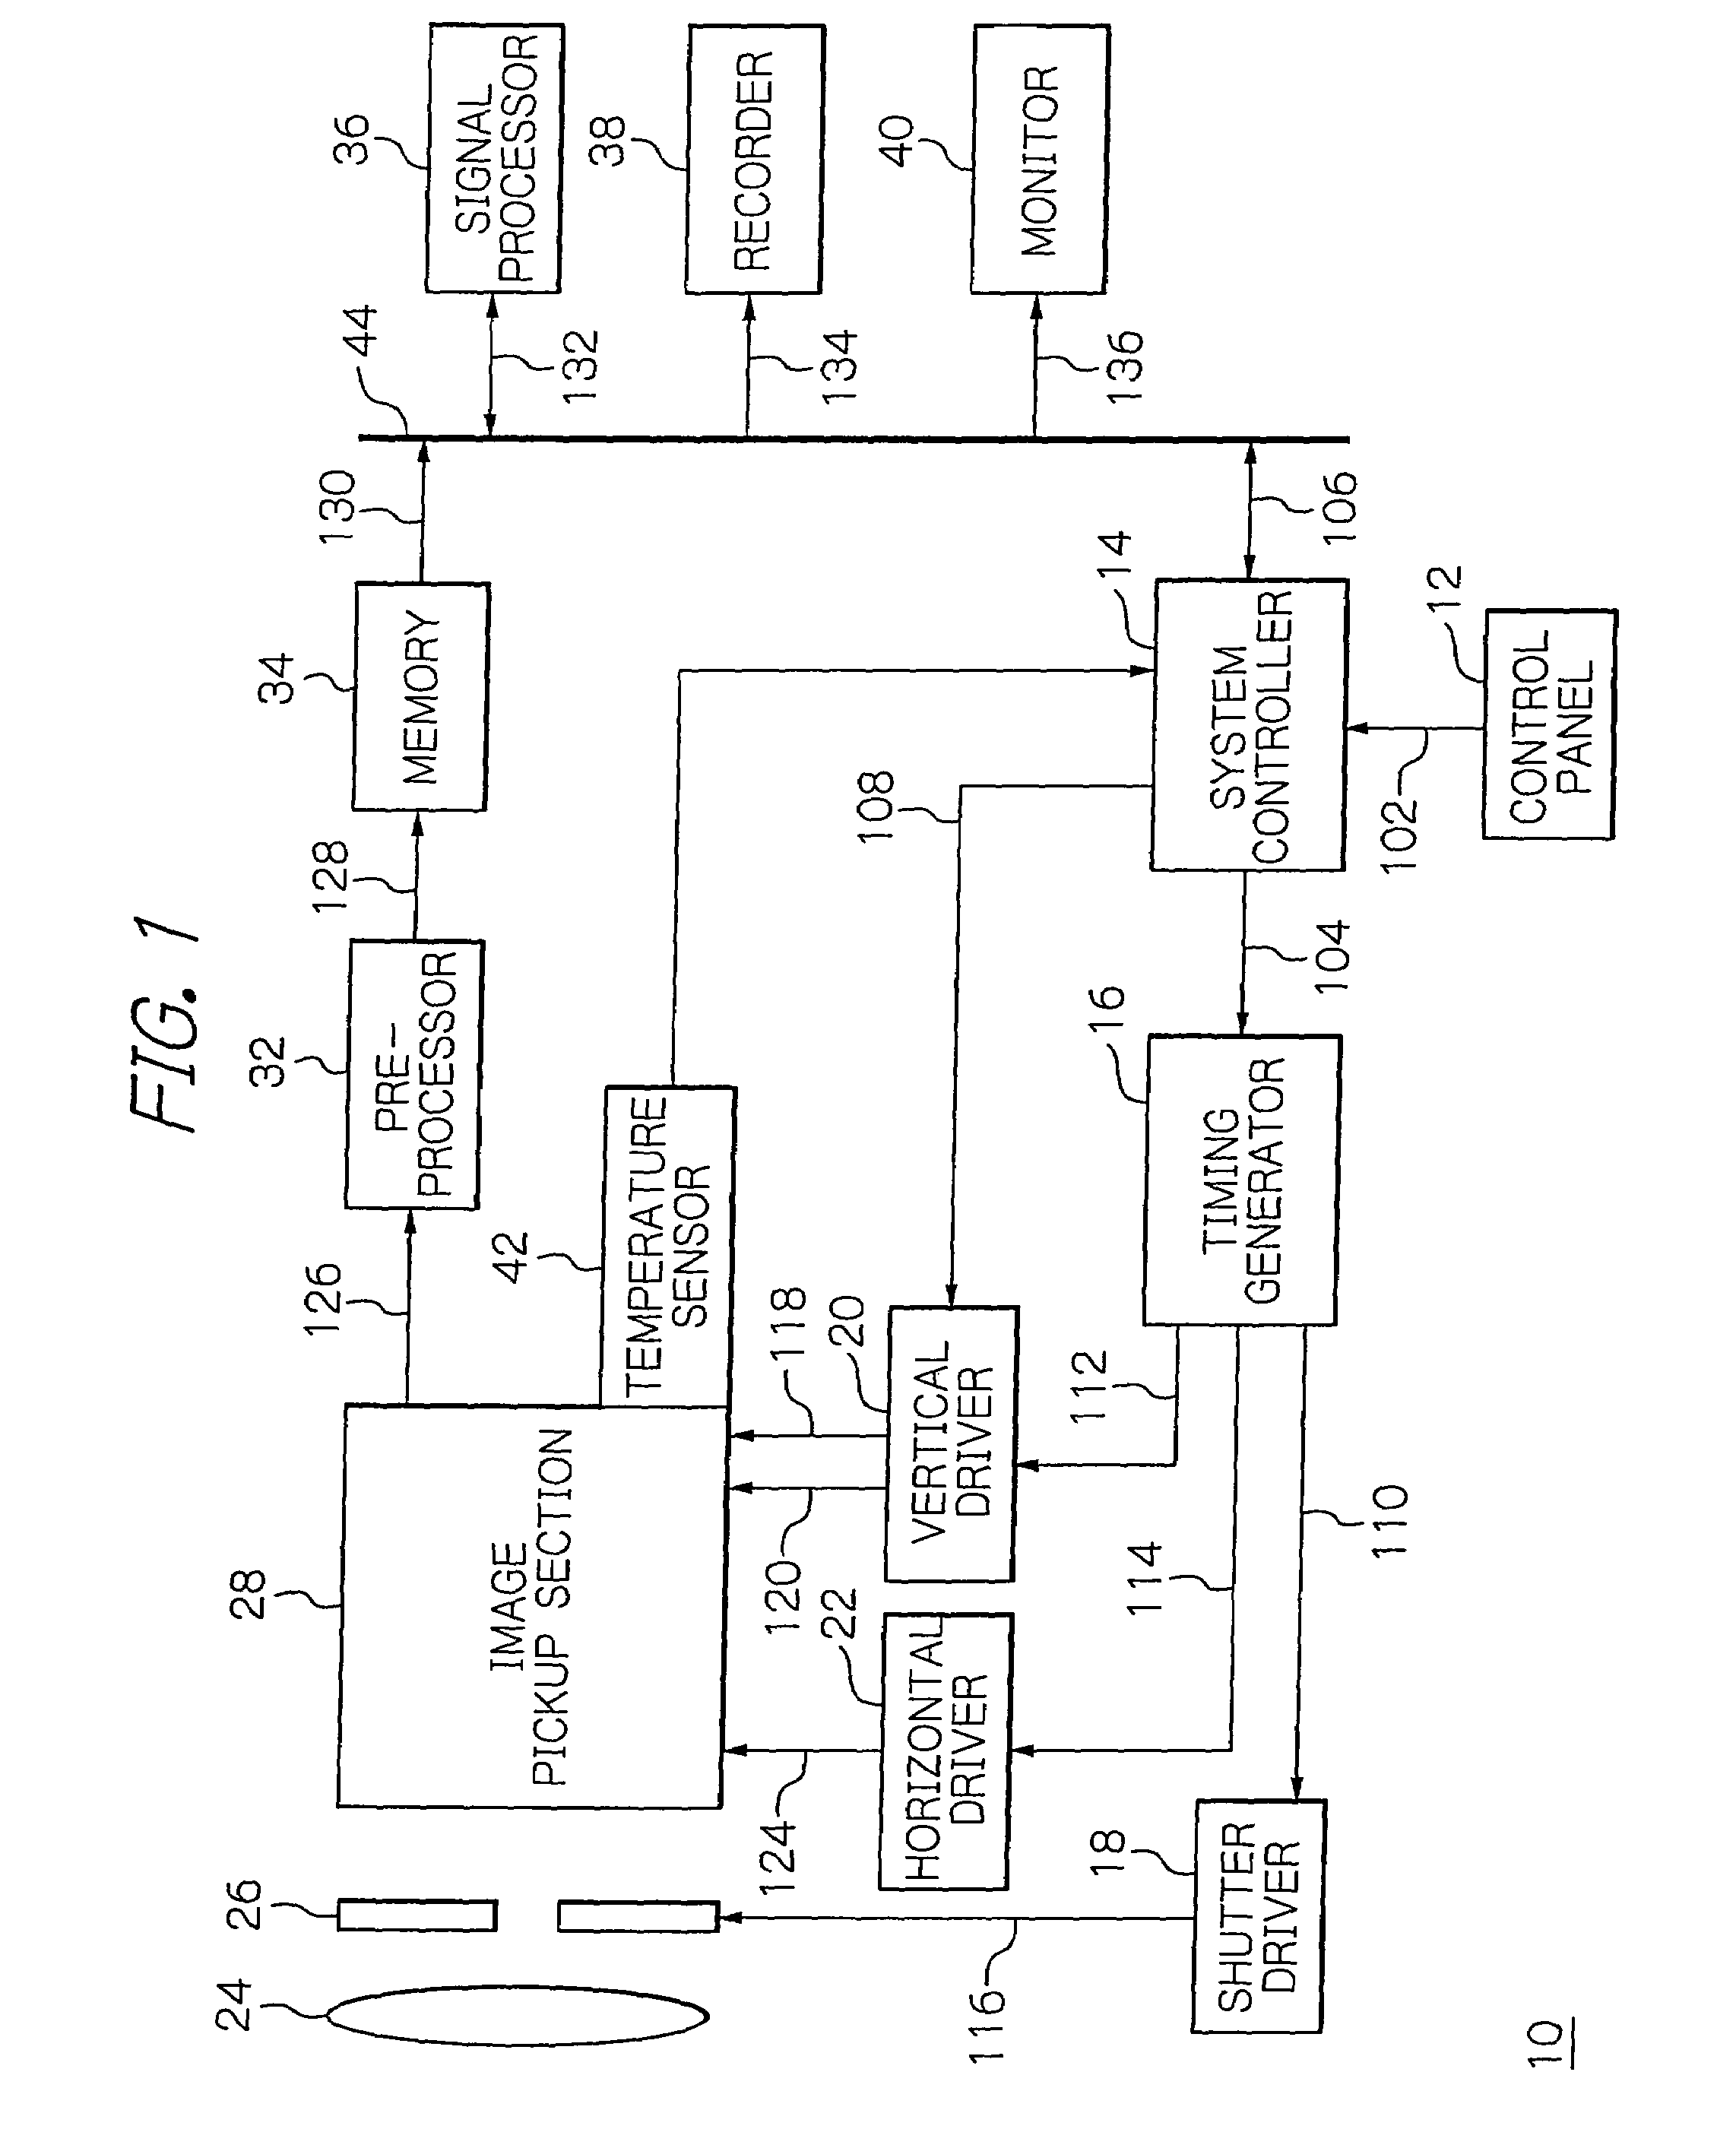 Solid-state image pickup apparatus multiplying signal charges depending on imaging circumstances